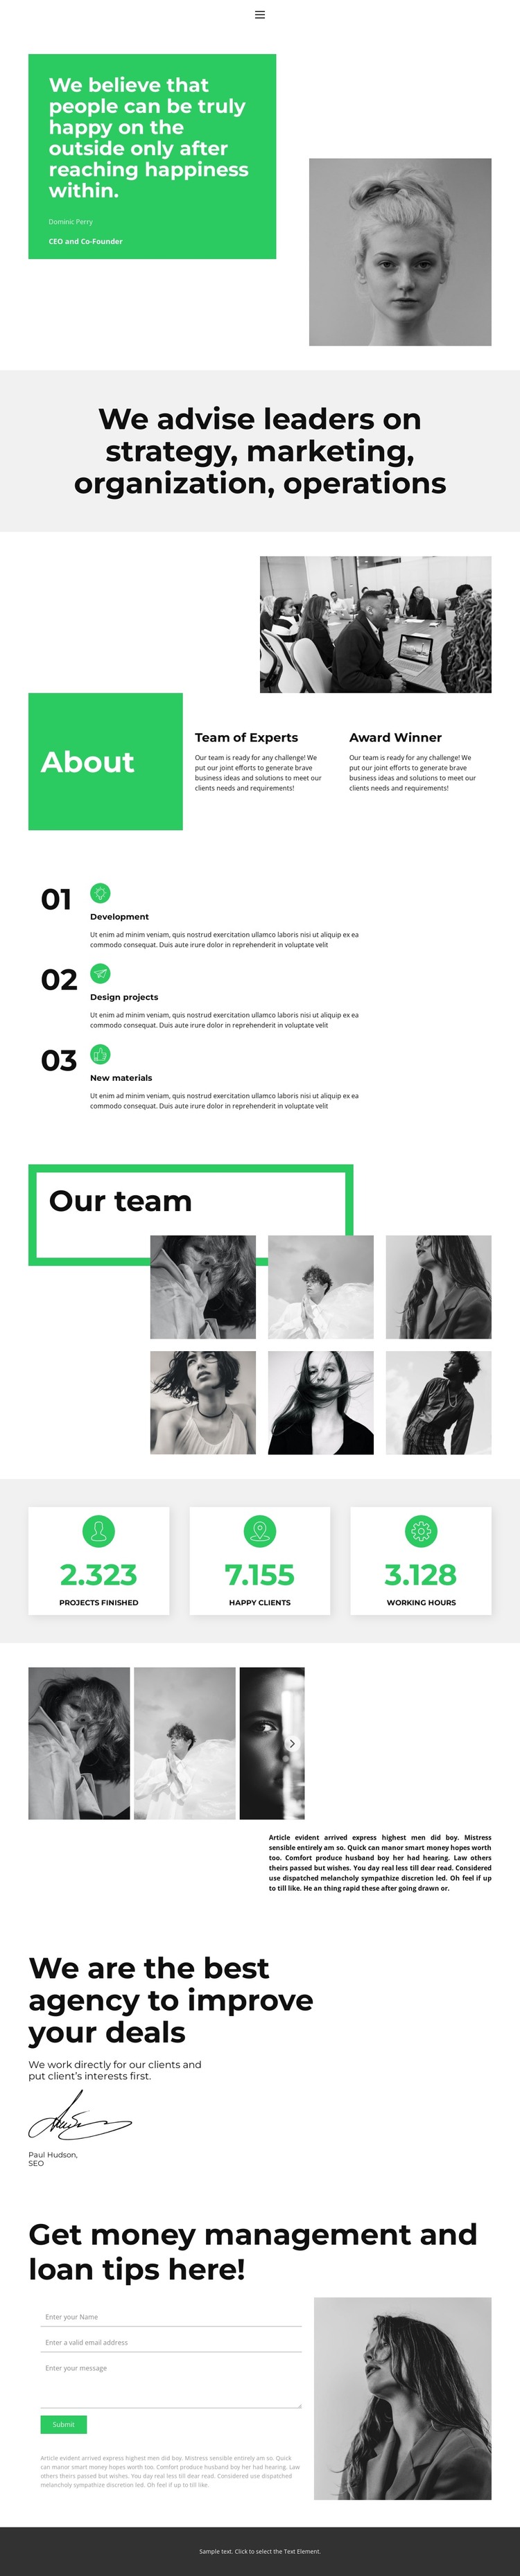 Working better together HTML Template